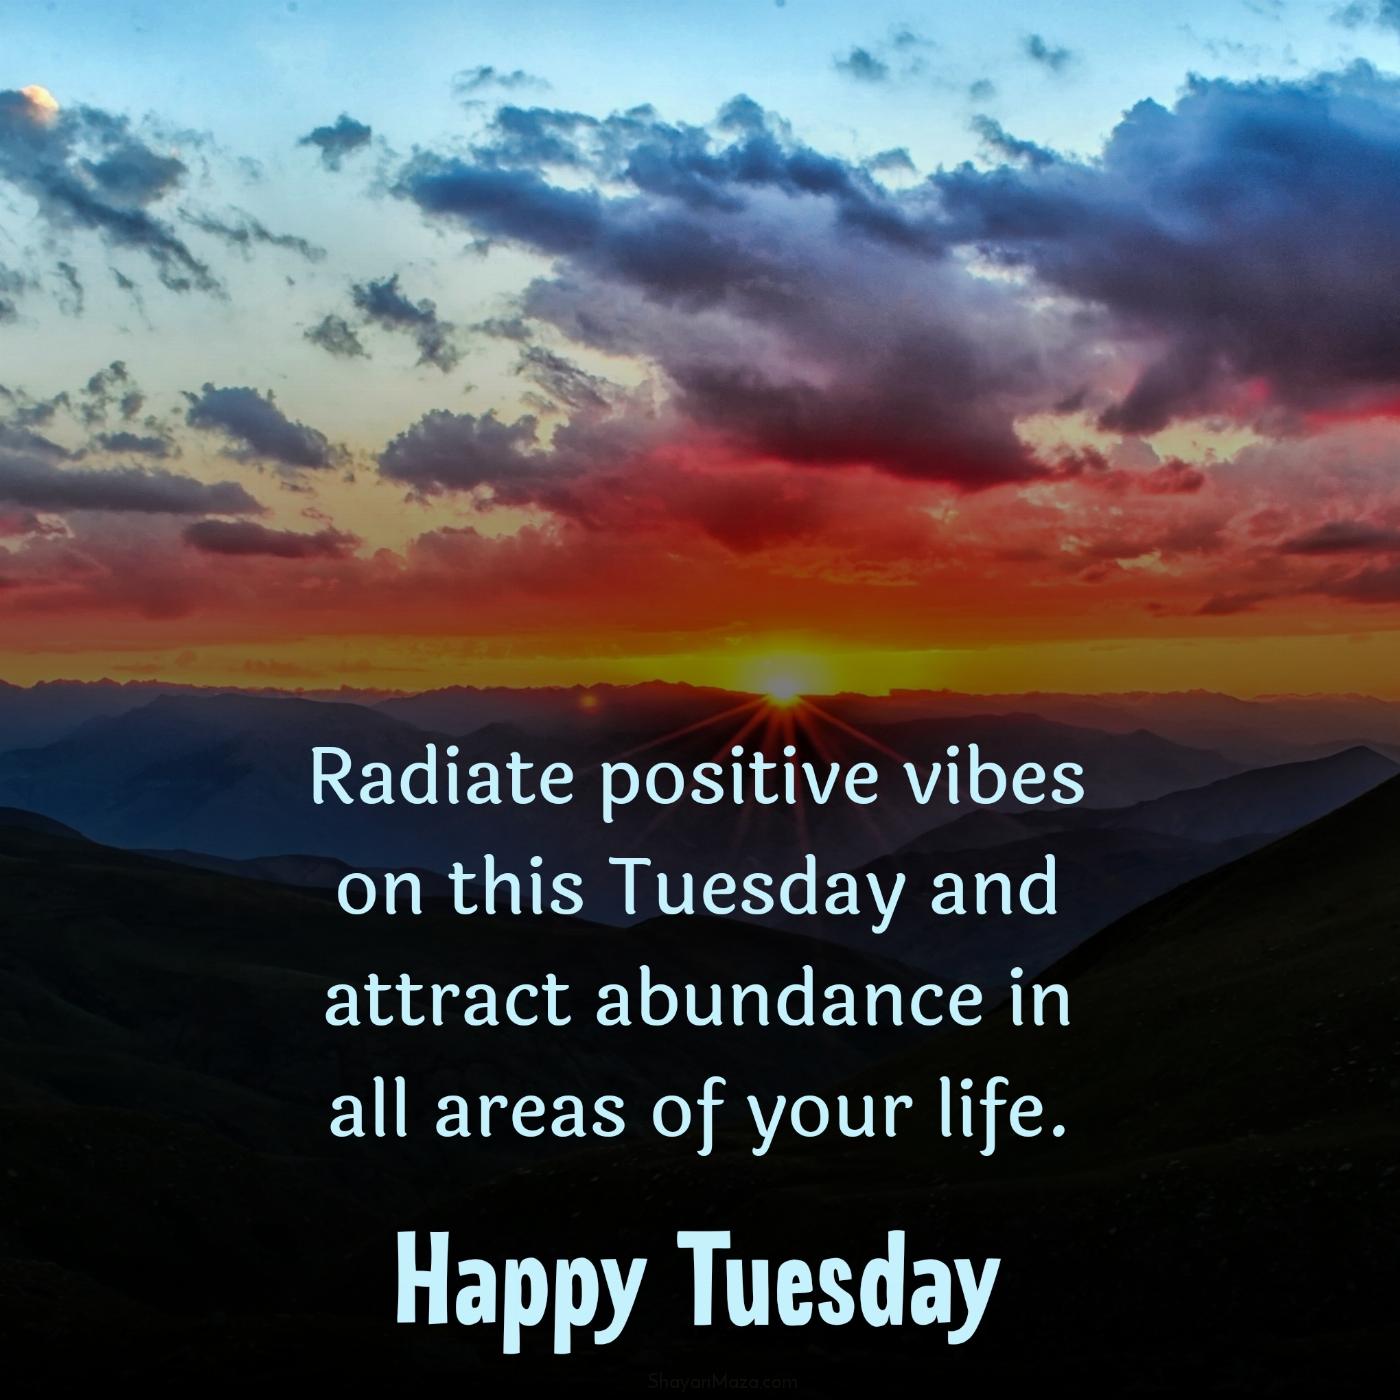 Radiate positive vibes on this Tuesday and attract abundance